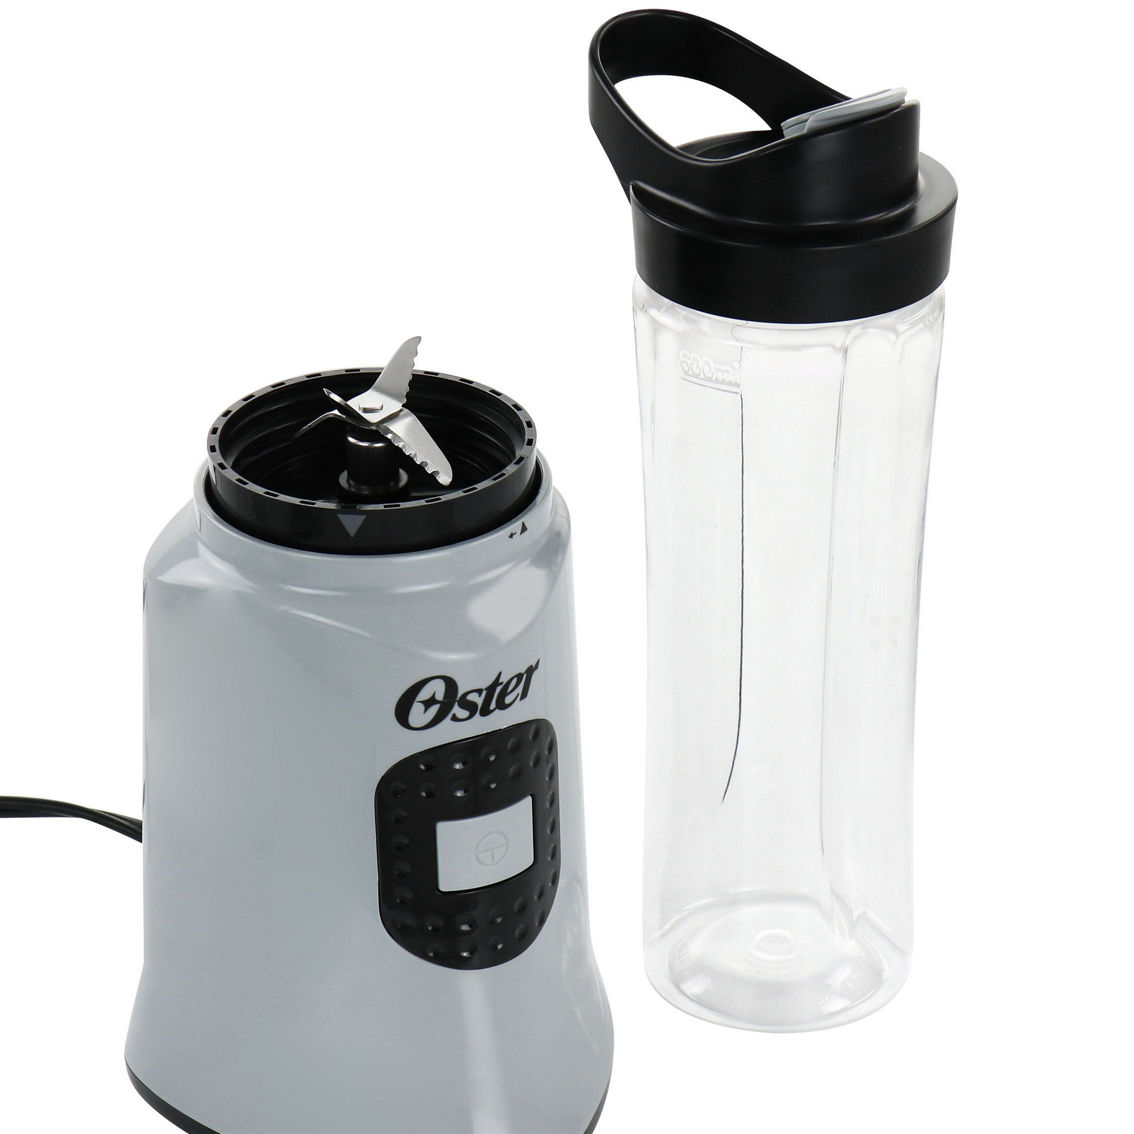 Oster My Blend 400 Watt Personal Blender with Portable 20oz Smoothie Cup in Grey - Image 2 of 5